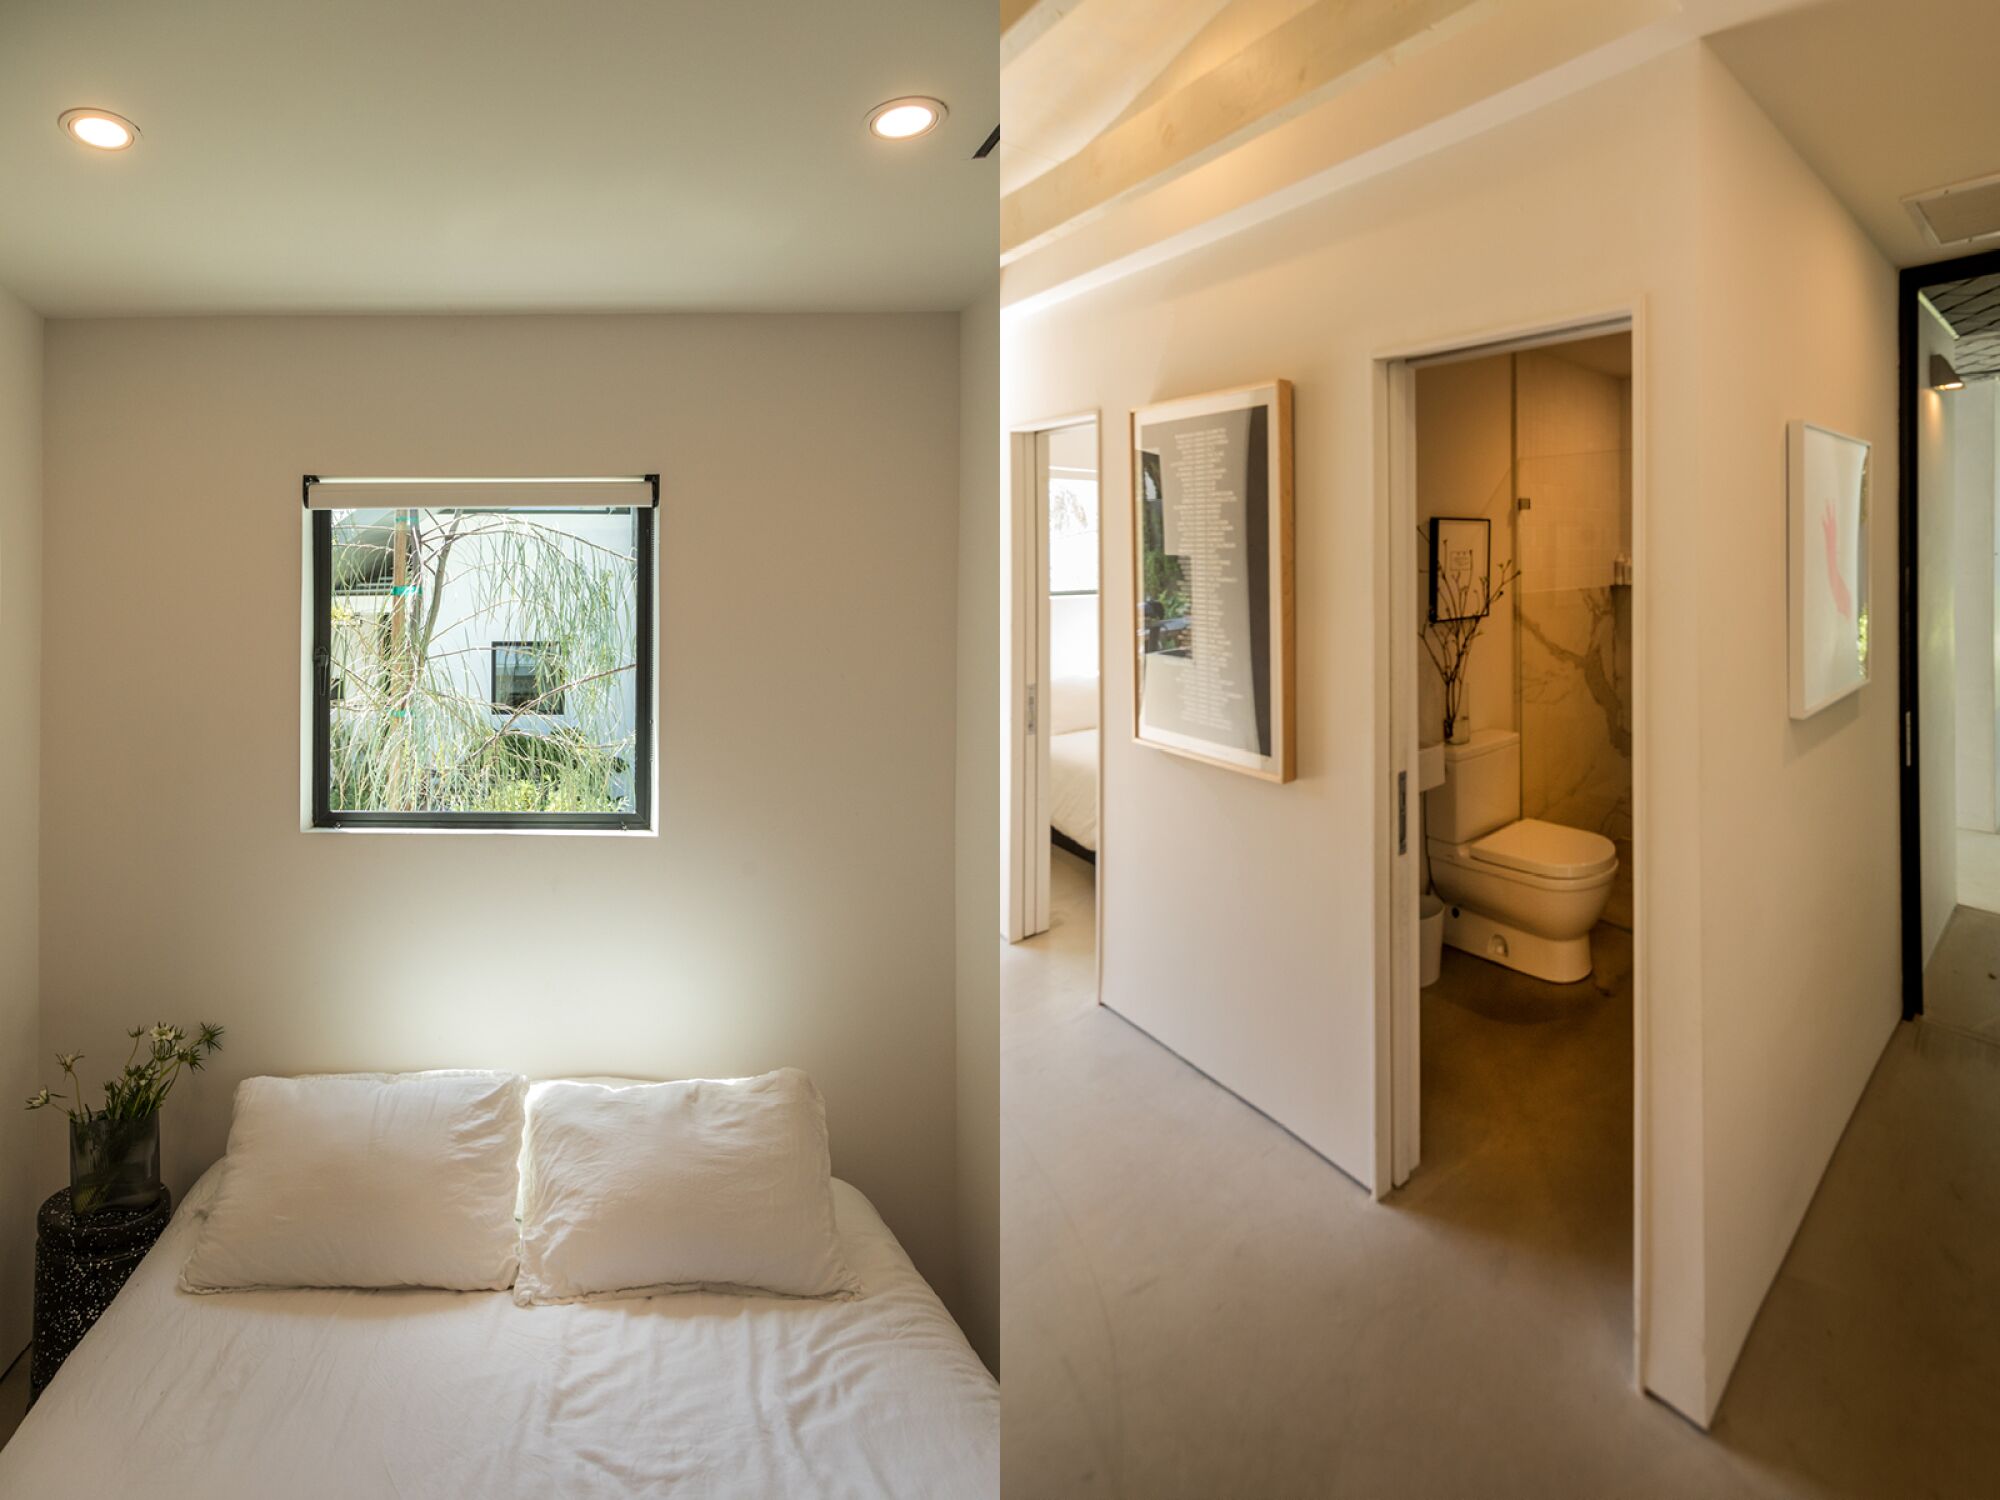 Paired photos of a bedroom and a bathroom glimpsed through a doorway.